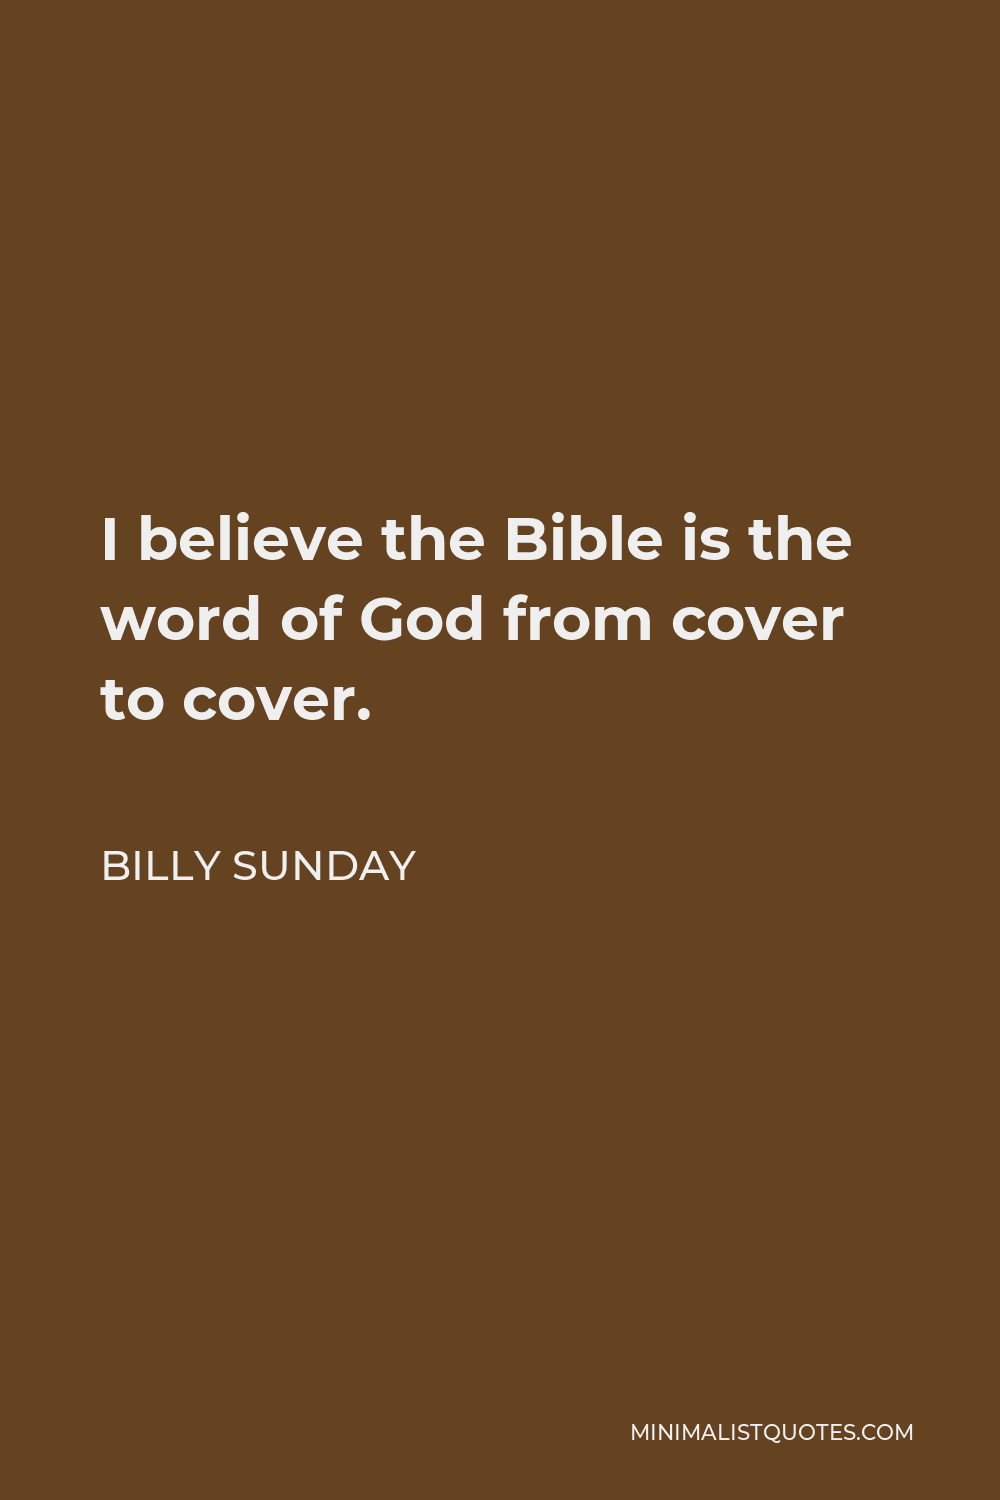 Billy Sunday Quote - I believe the Bible is the word of God from cover to cover.